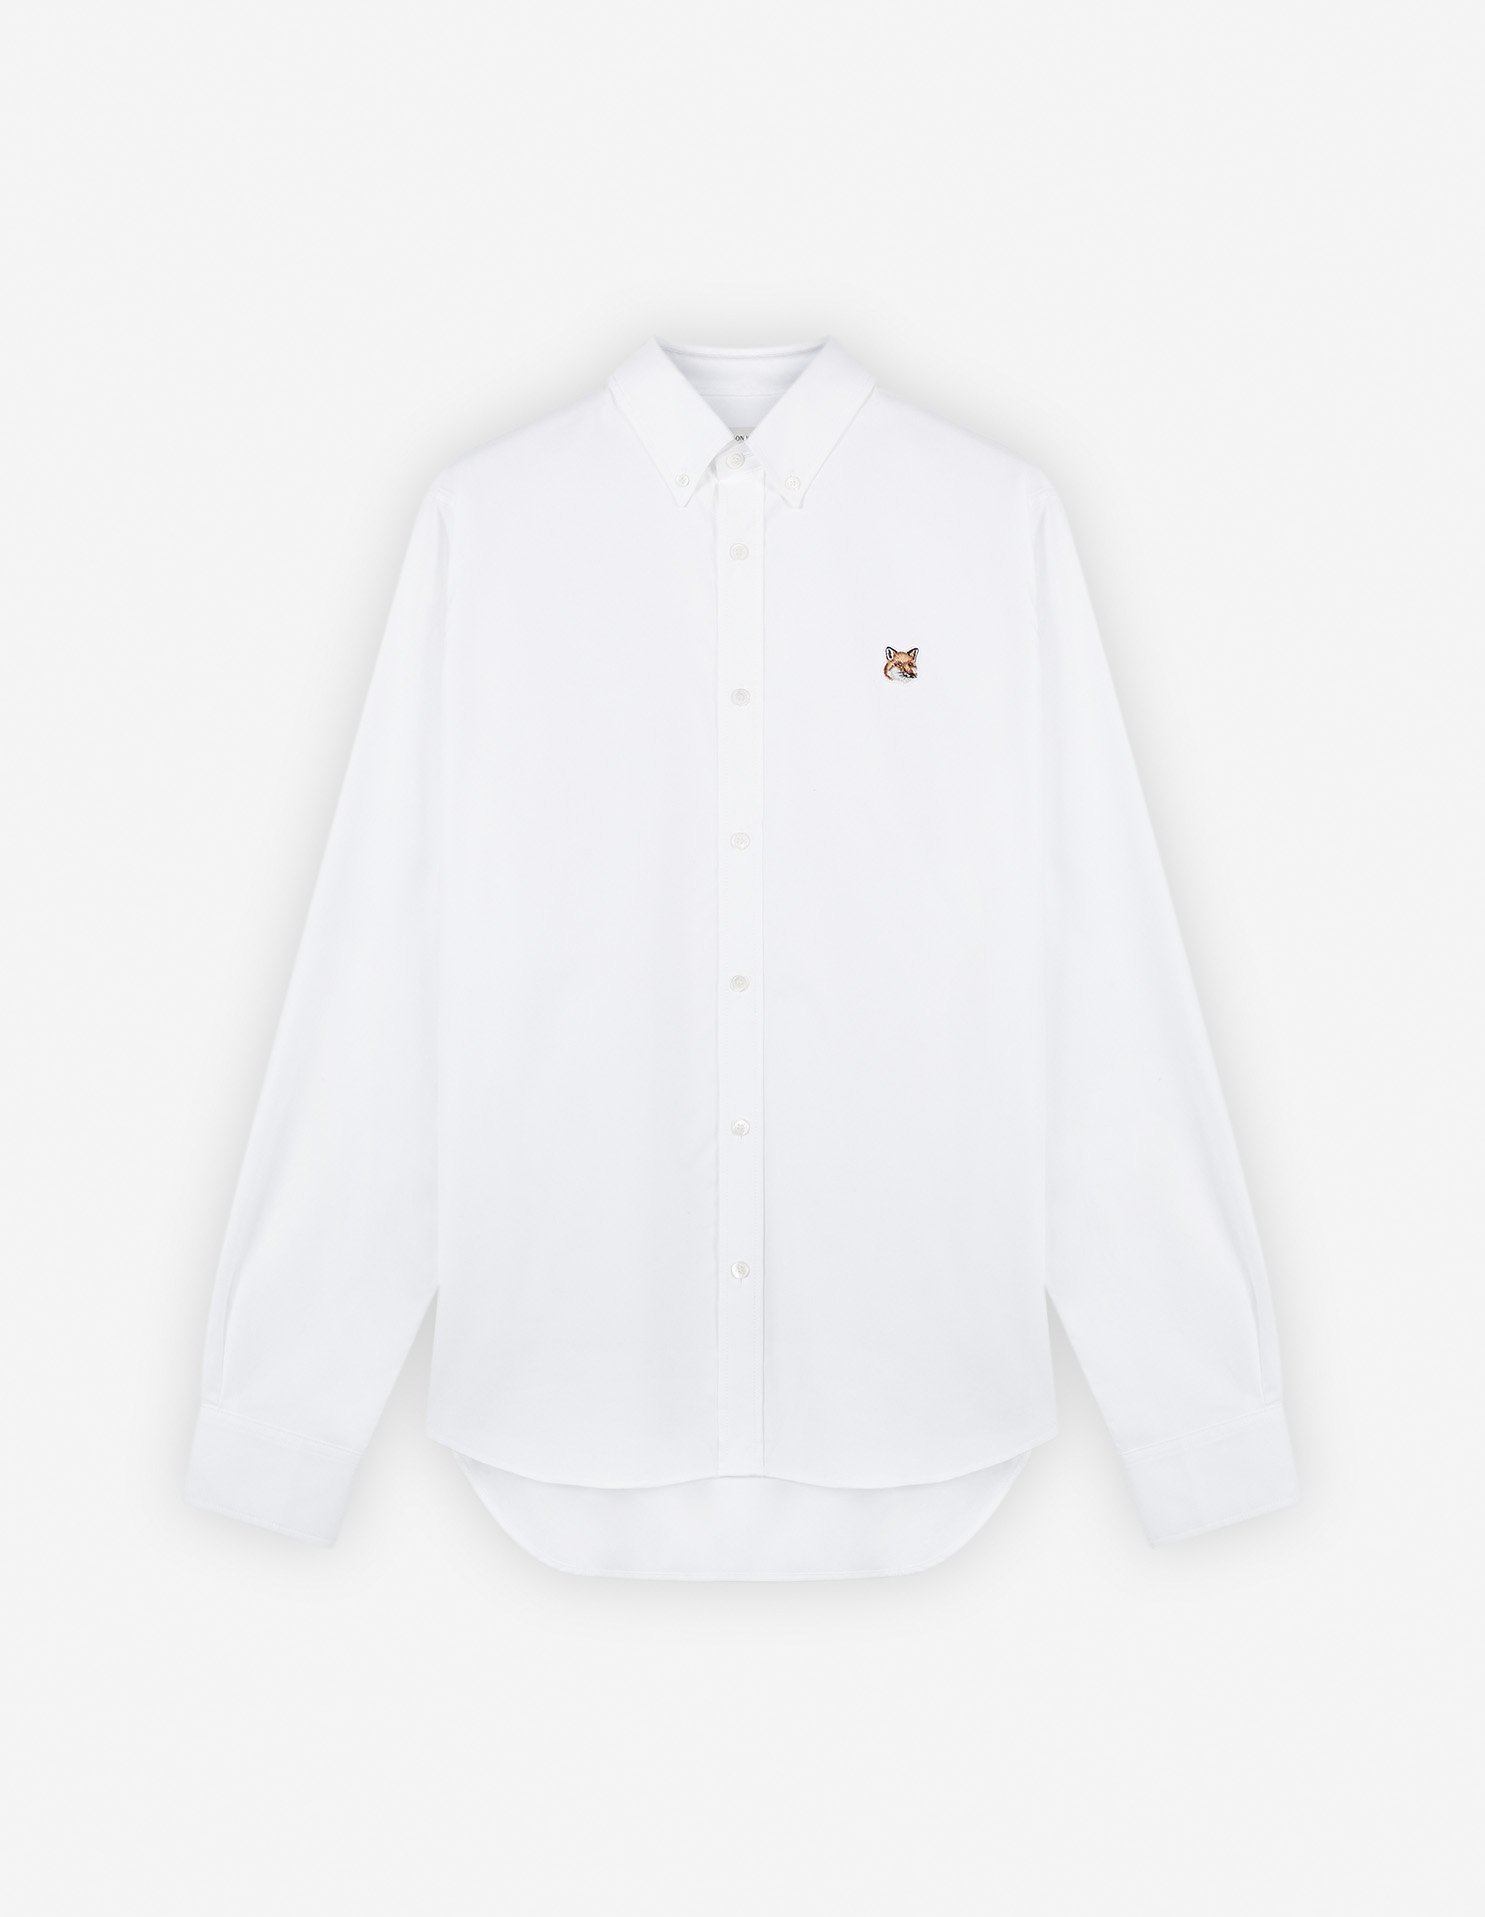 MAISON KITSUNE/(M)BUTTON DOWN CLASSIC SHIRT WITH INSTITUTIONAL FOX HEAD PATCH IN OXFORD